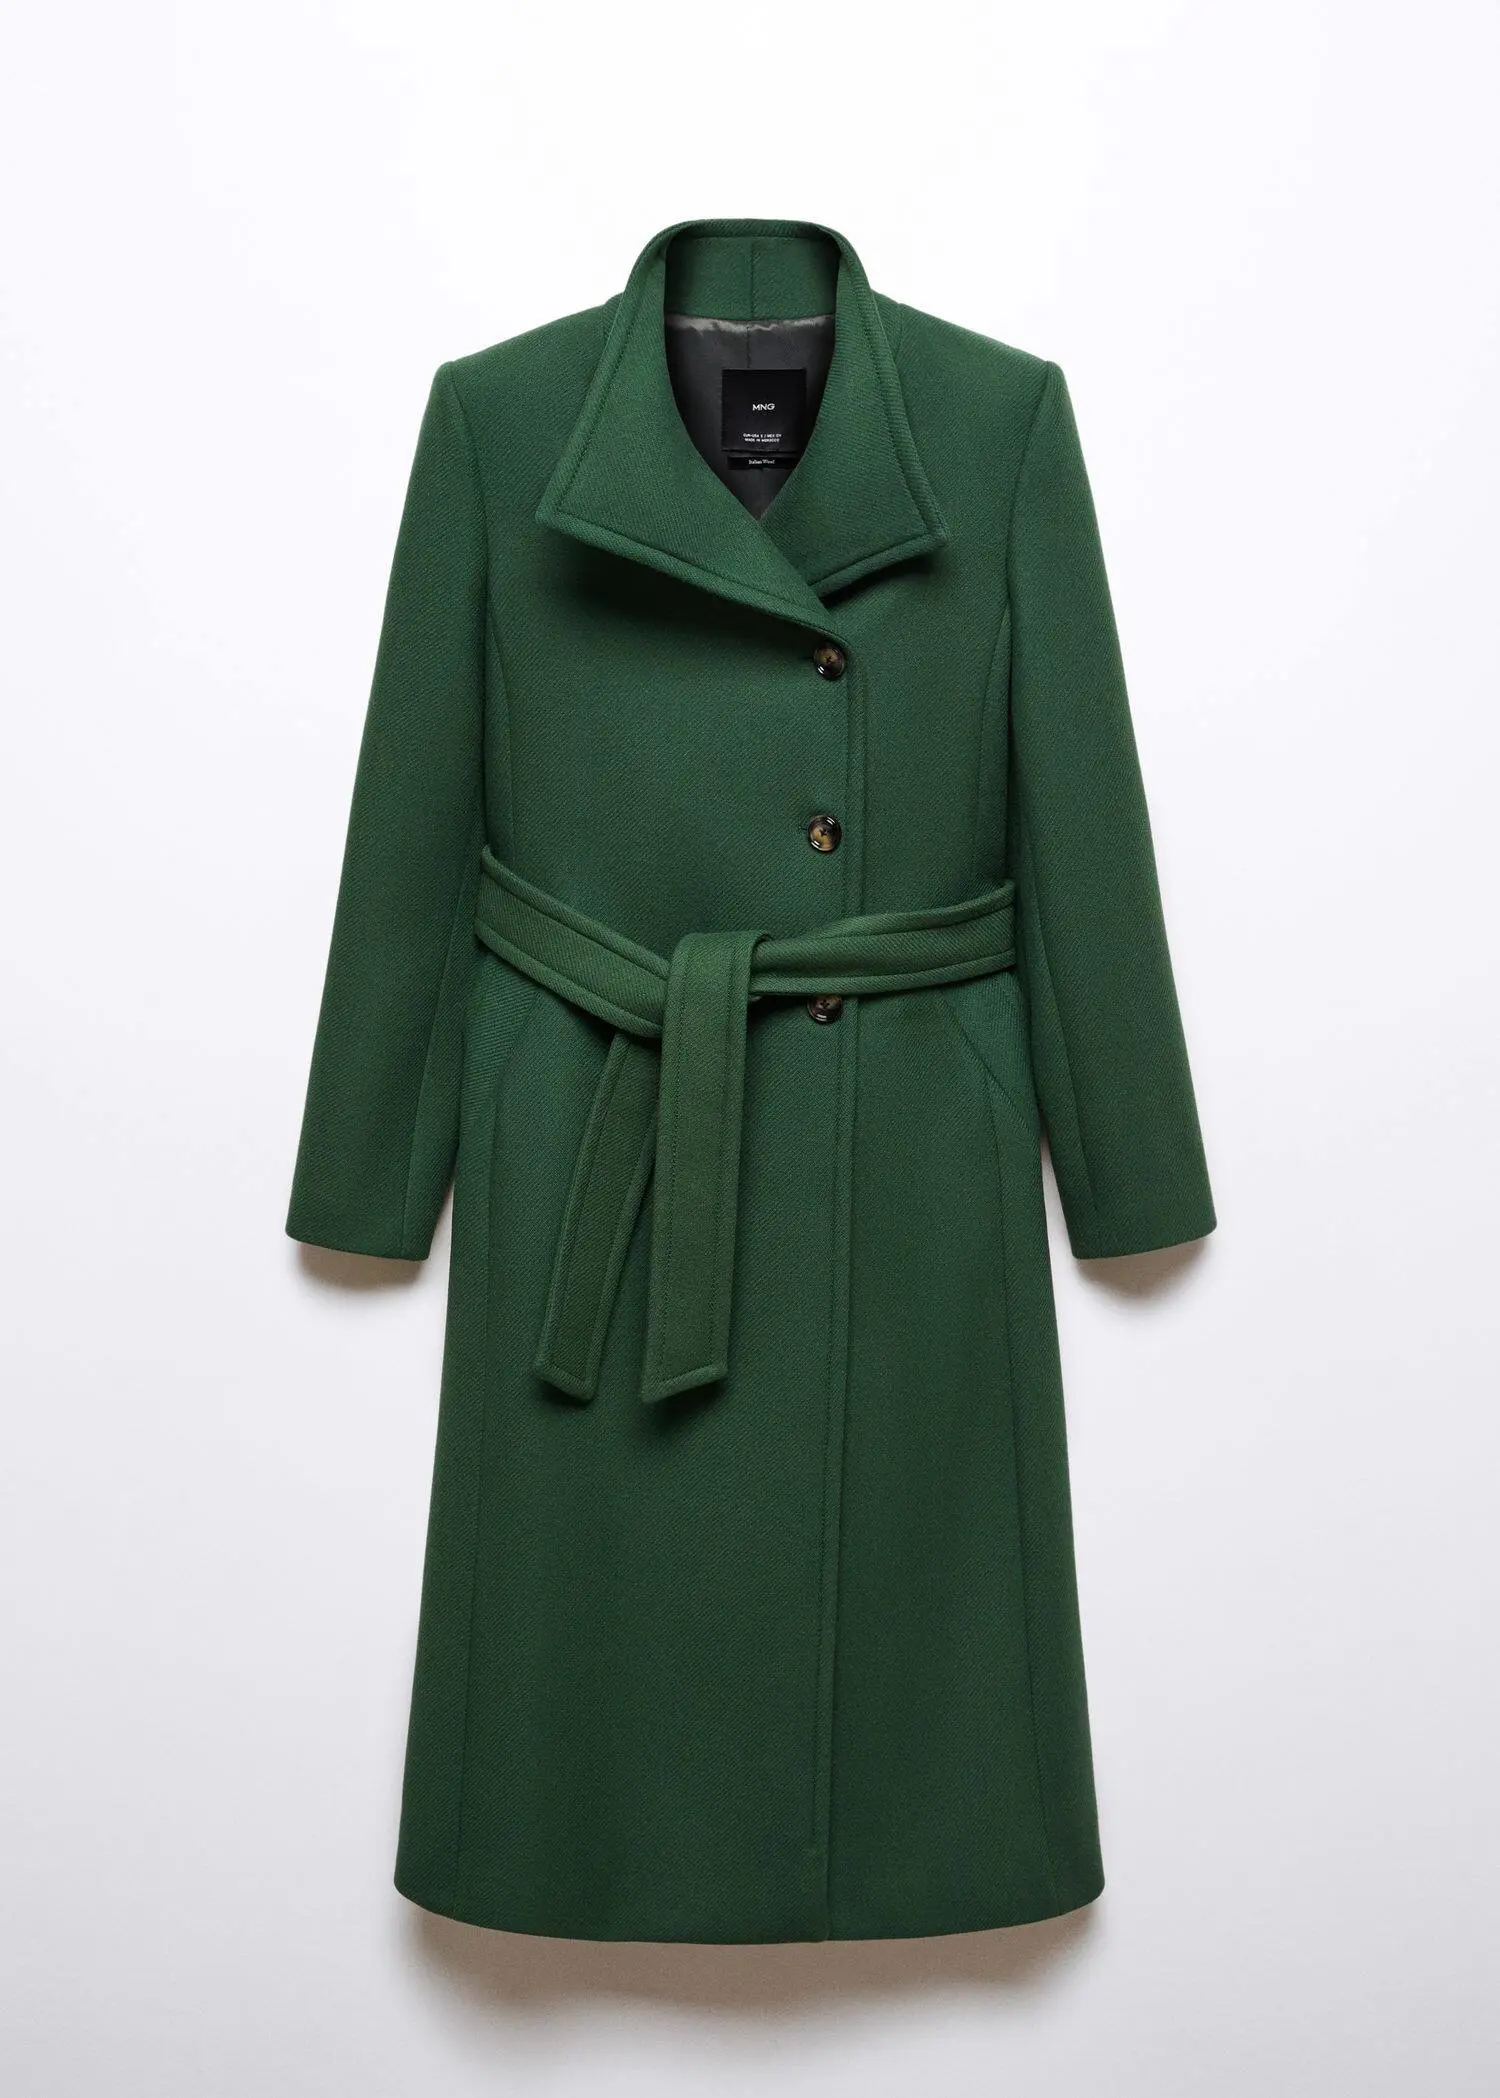 Mango Belted Manteco wool coat. a green coat is shown on a white background. 